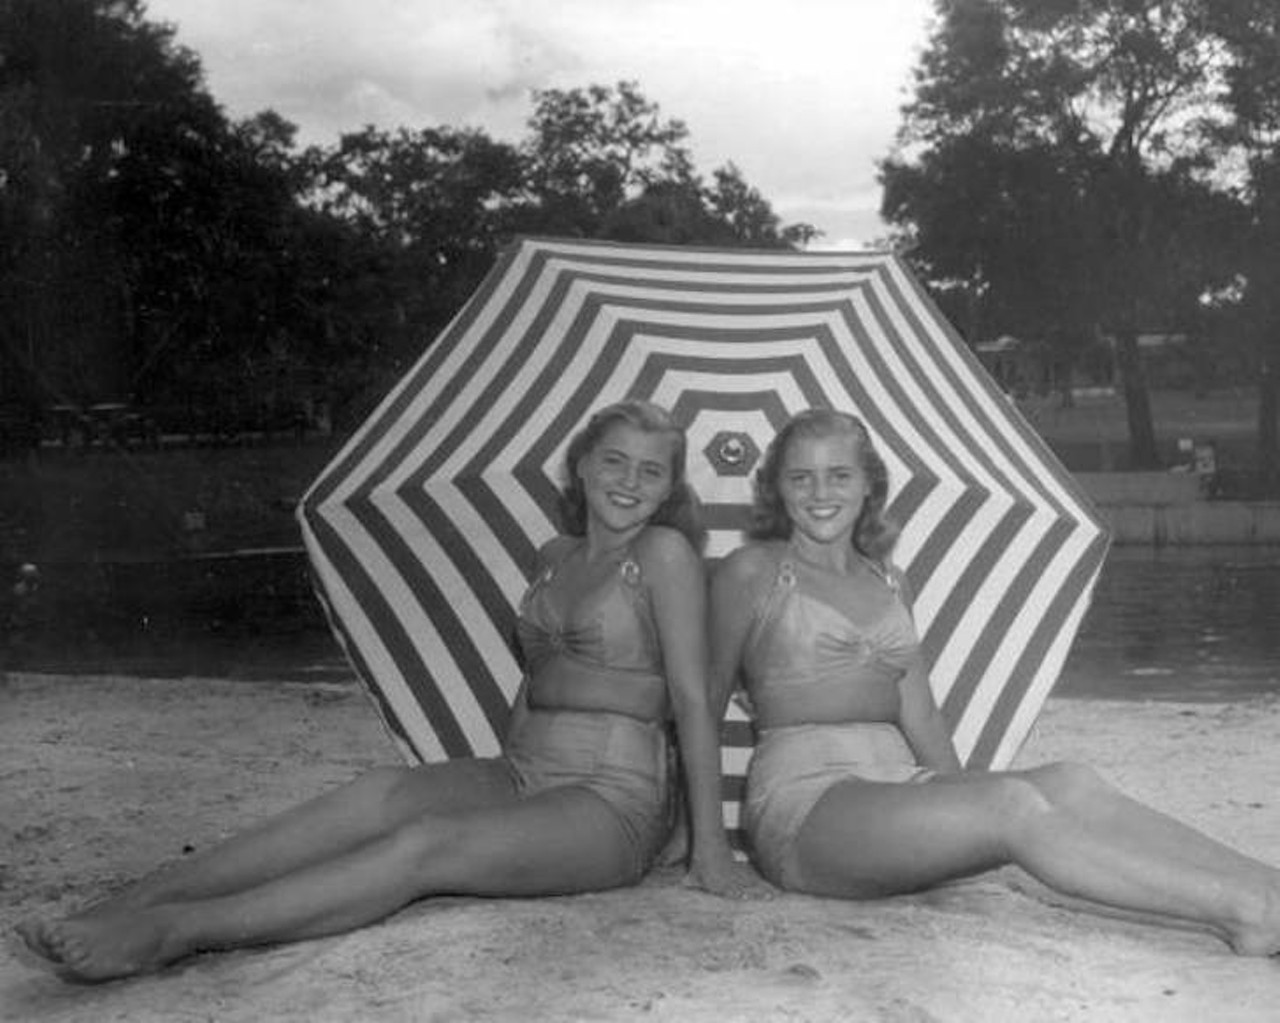 Unidentified women sit on the beach area of the springs - Sanlando Springs, 1946.